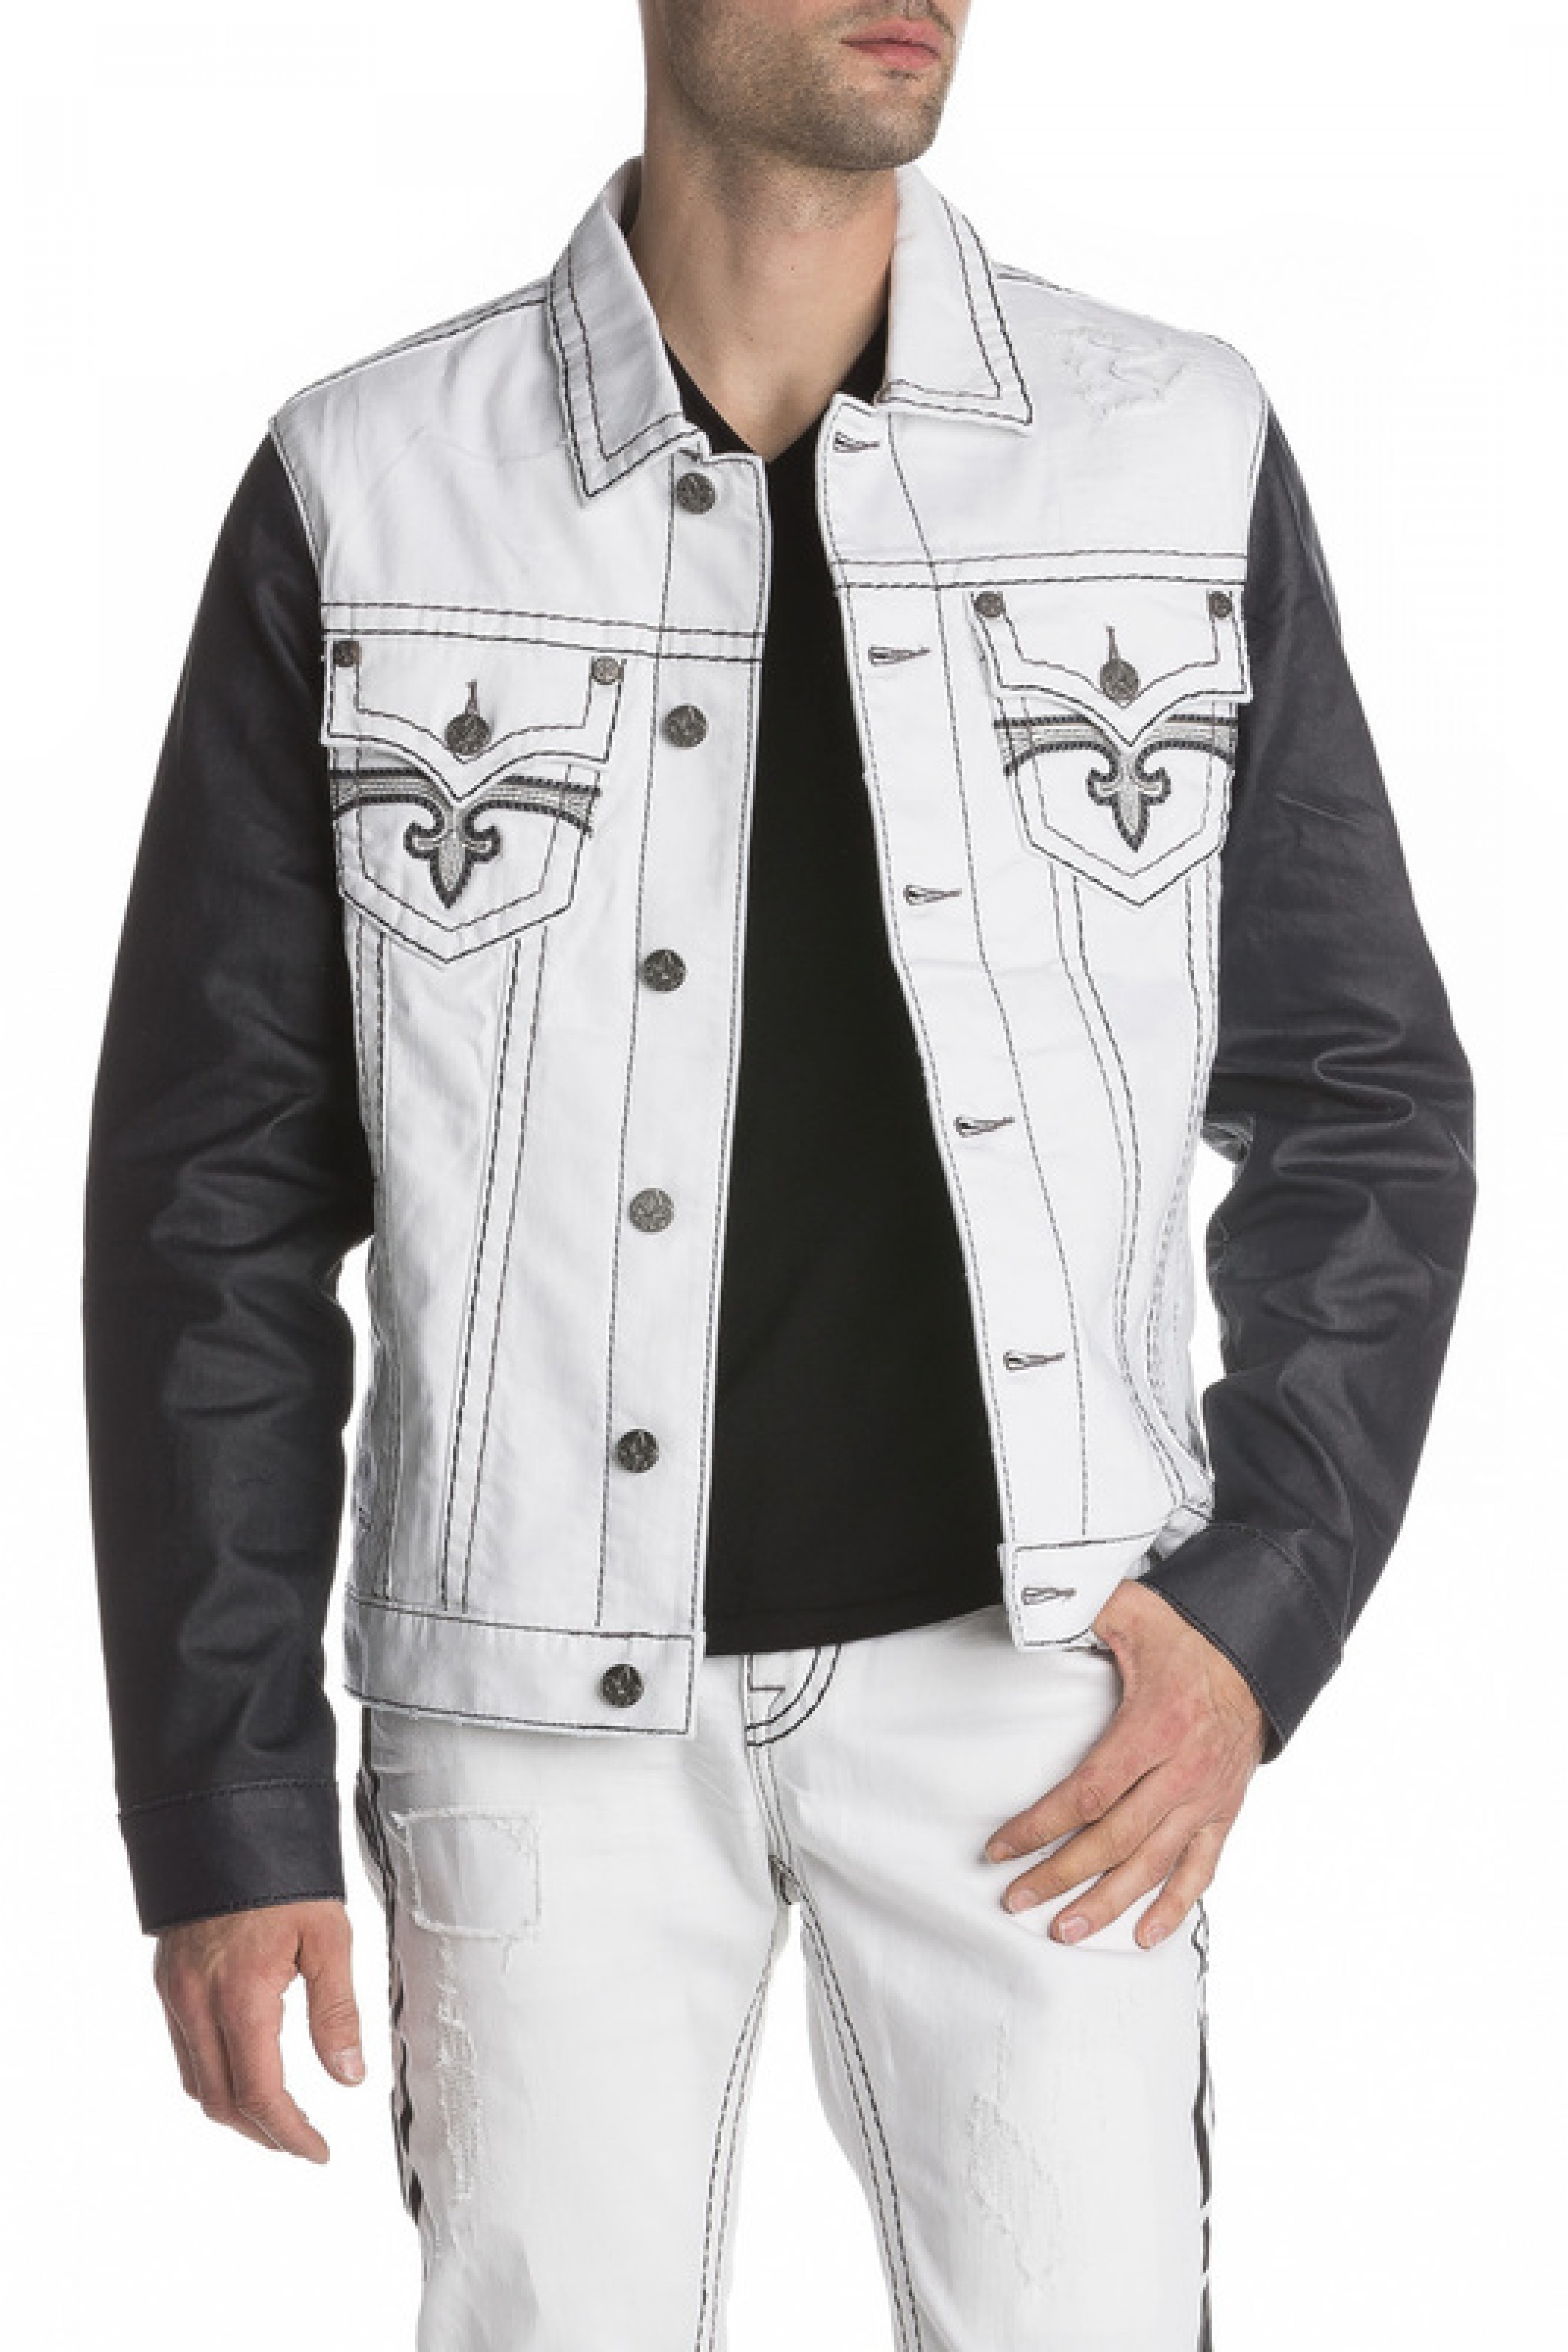 rock revival jean jacket outfit